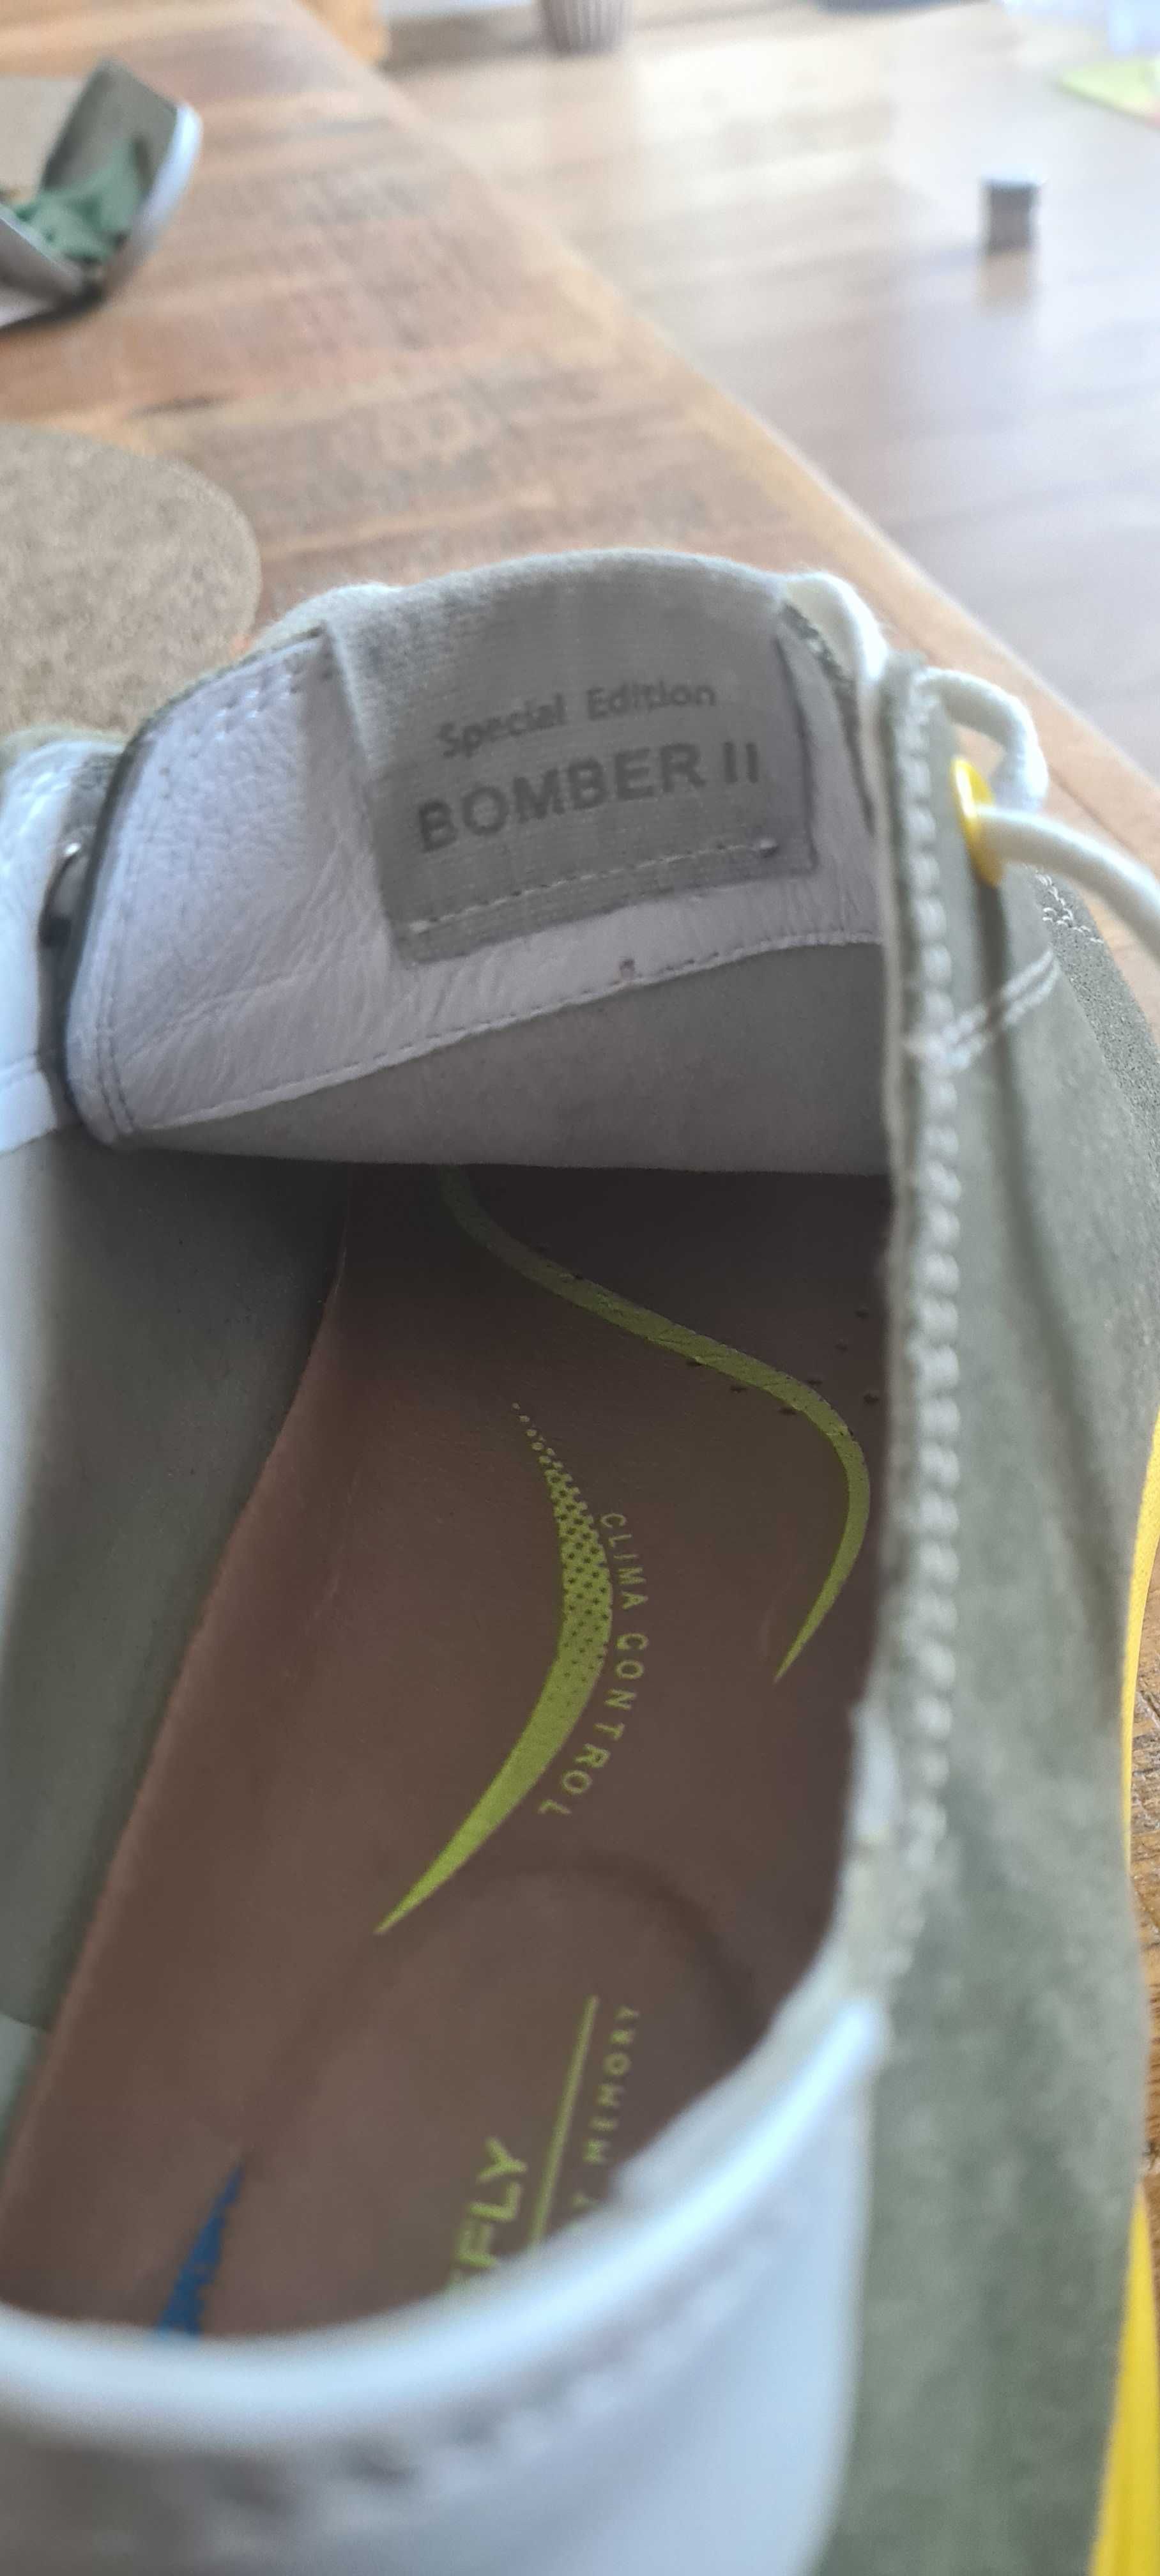 Buty STONEFLY Bomber ll Special edition, numer 43.